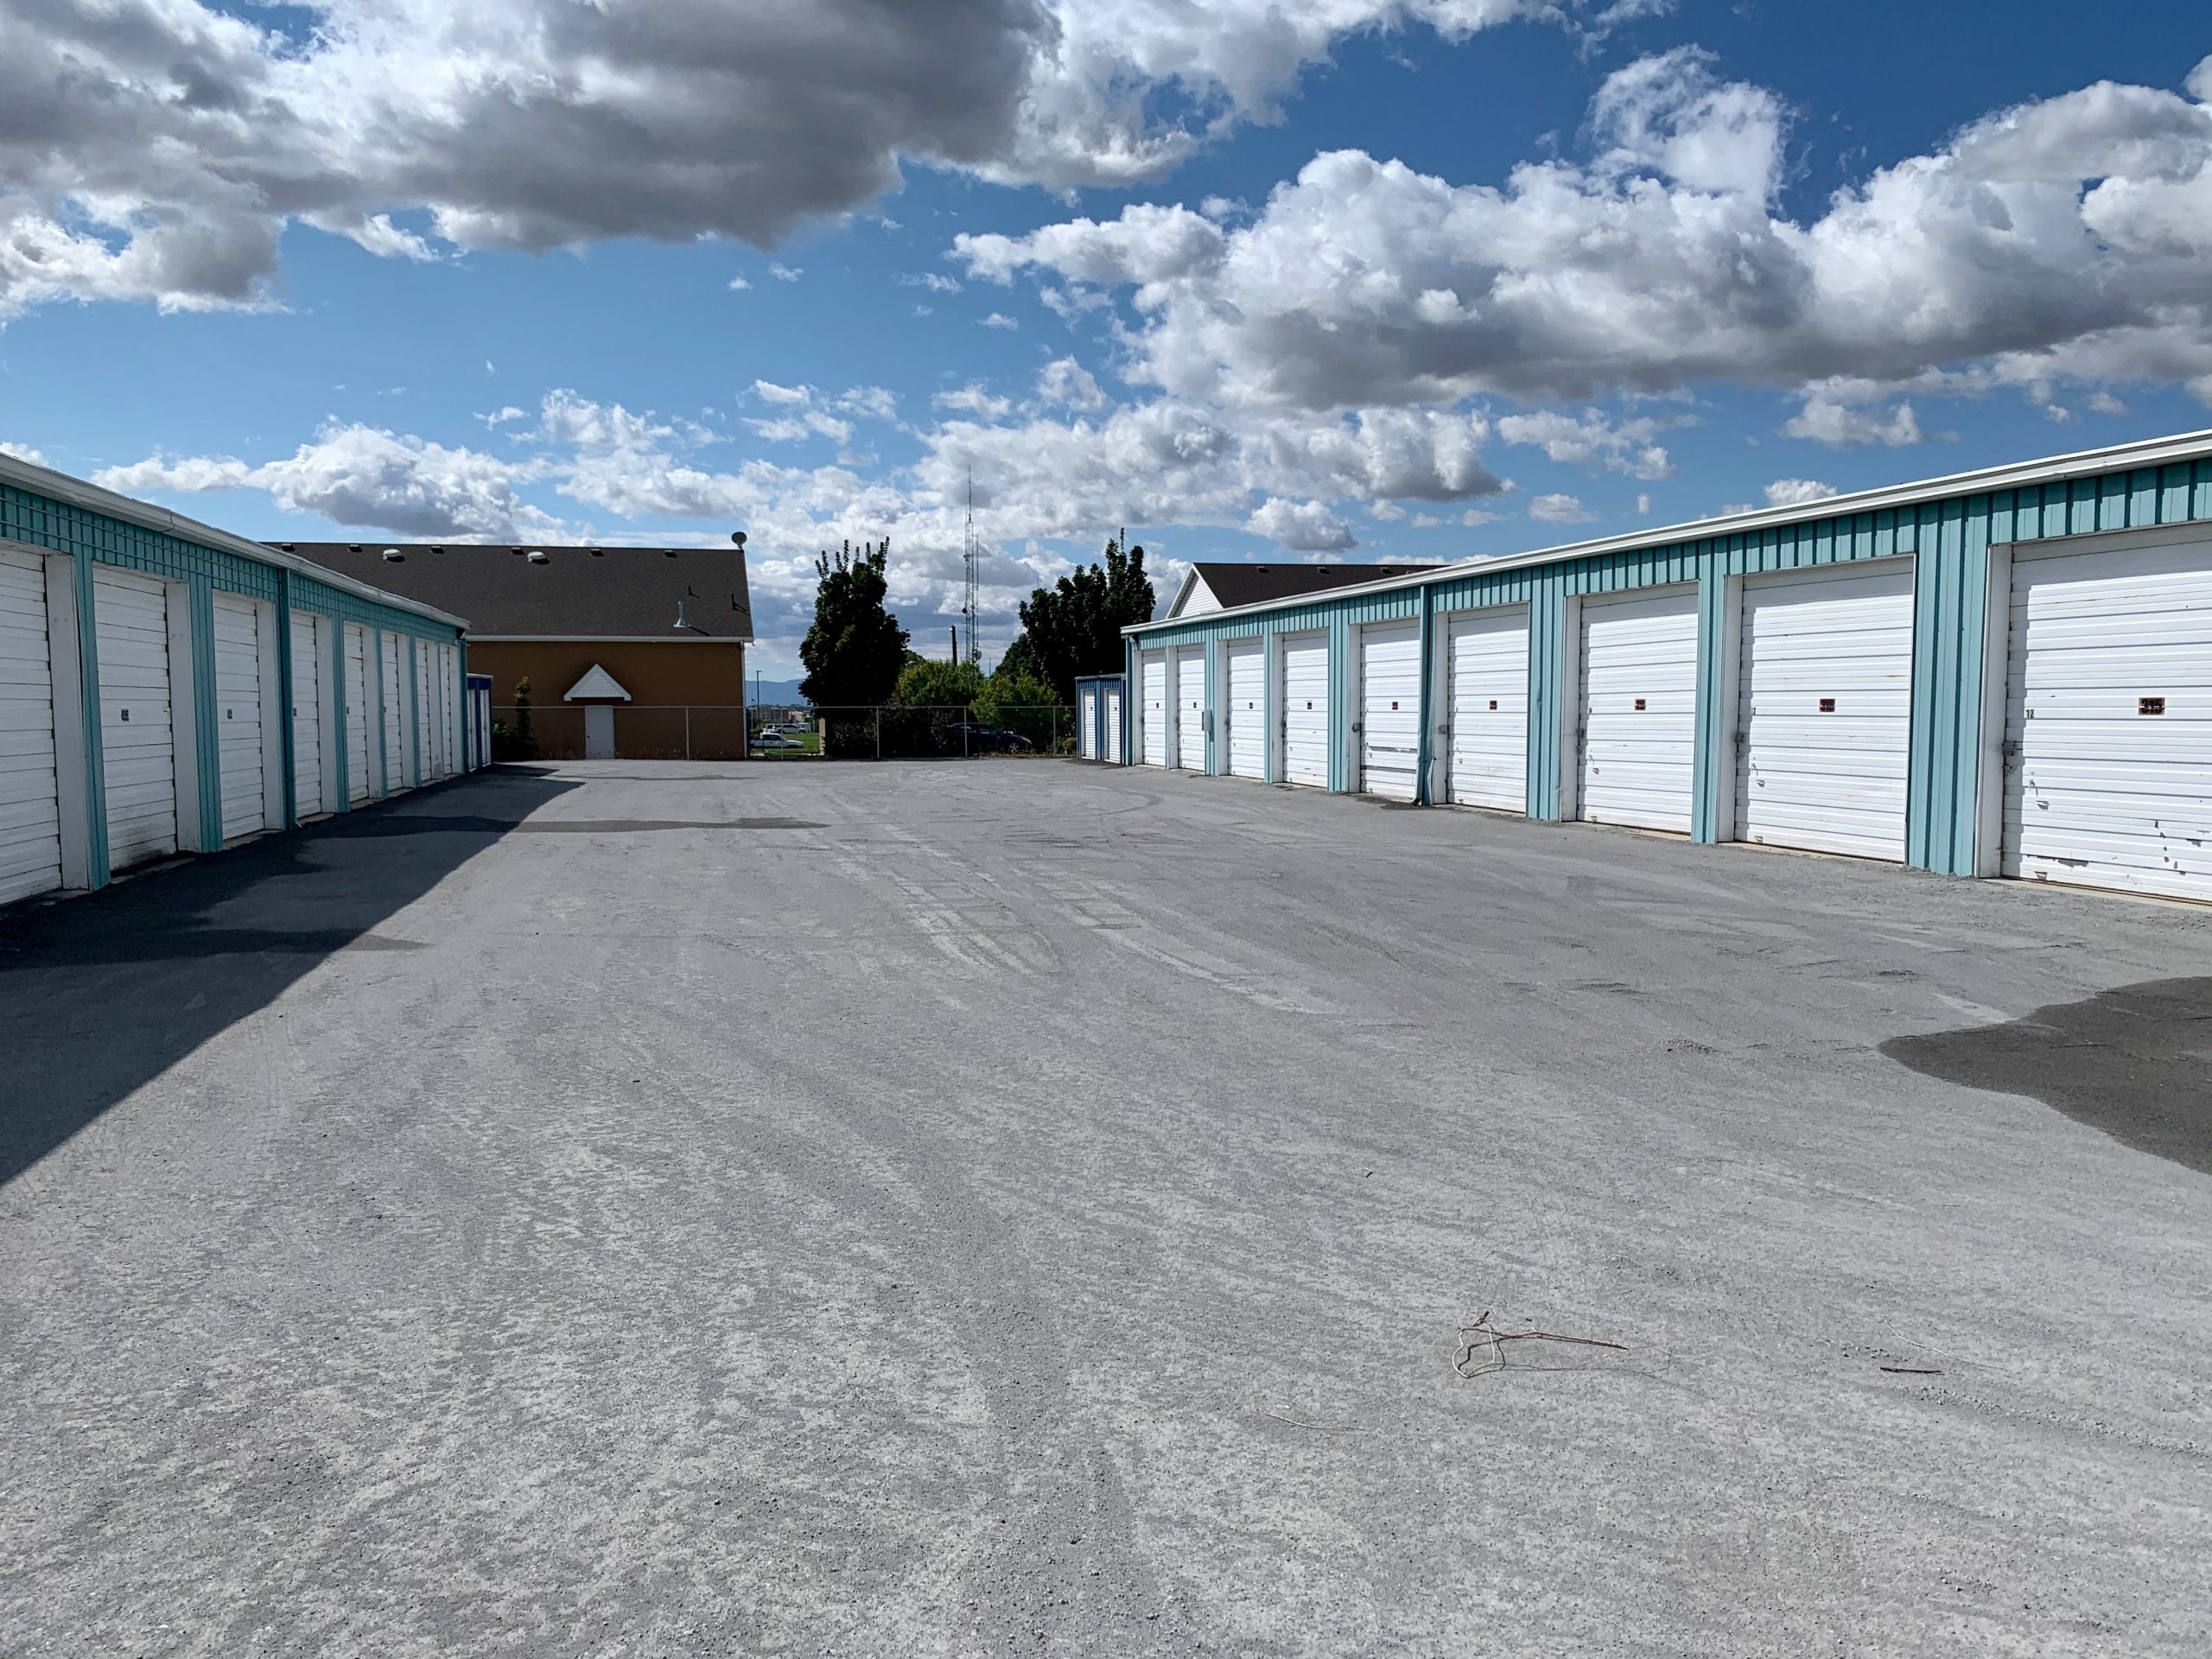 Choosing A Storage Unit For Your Needs